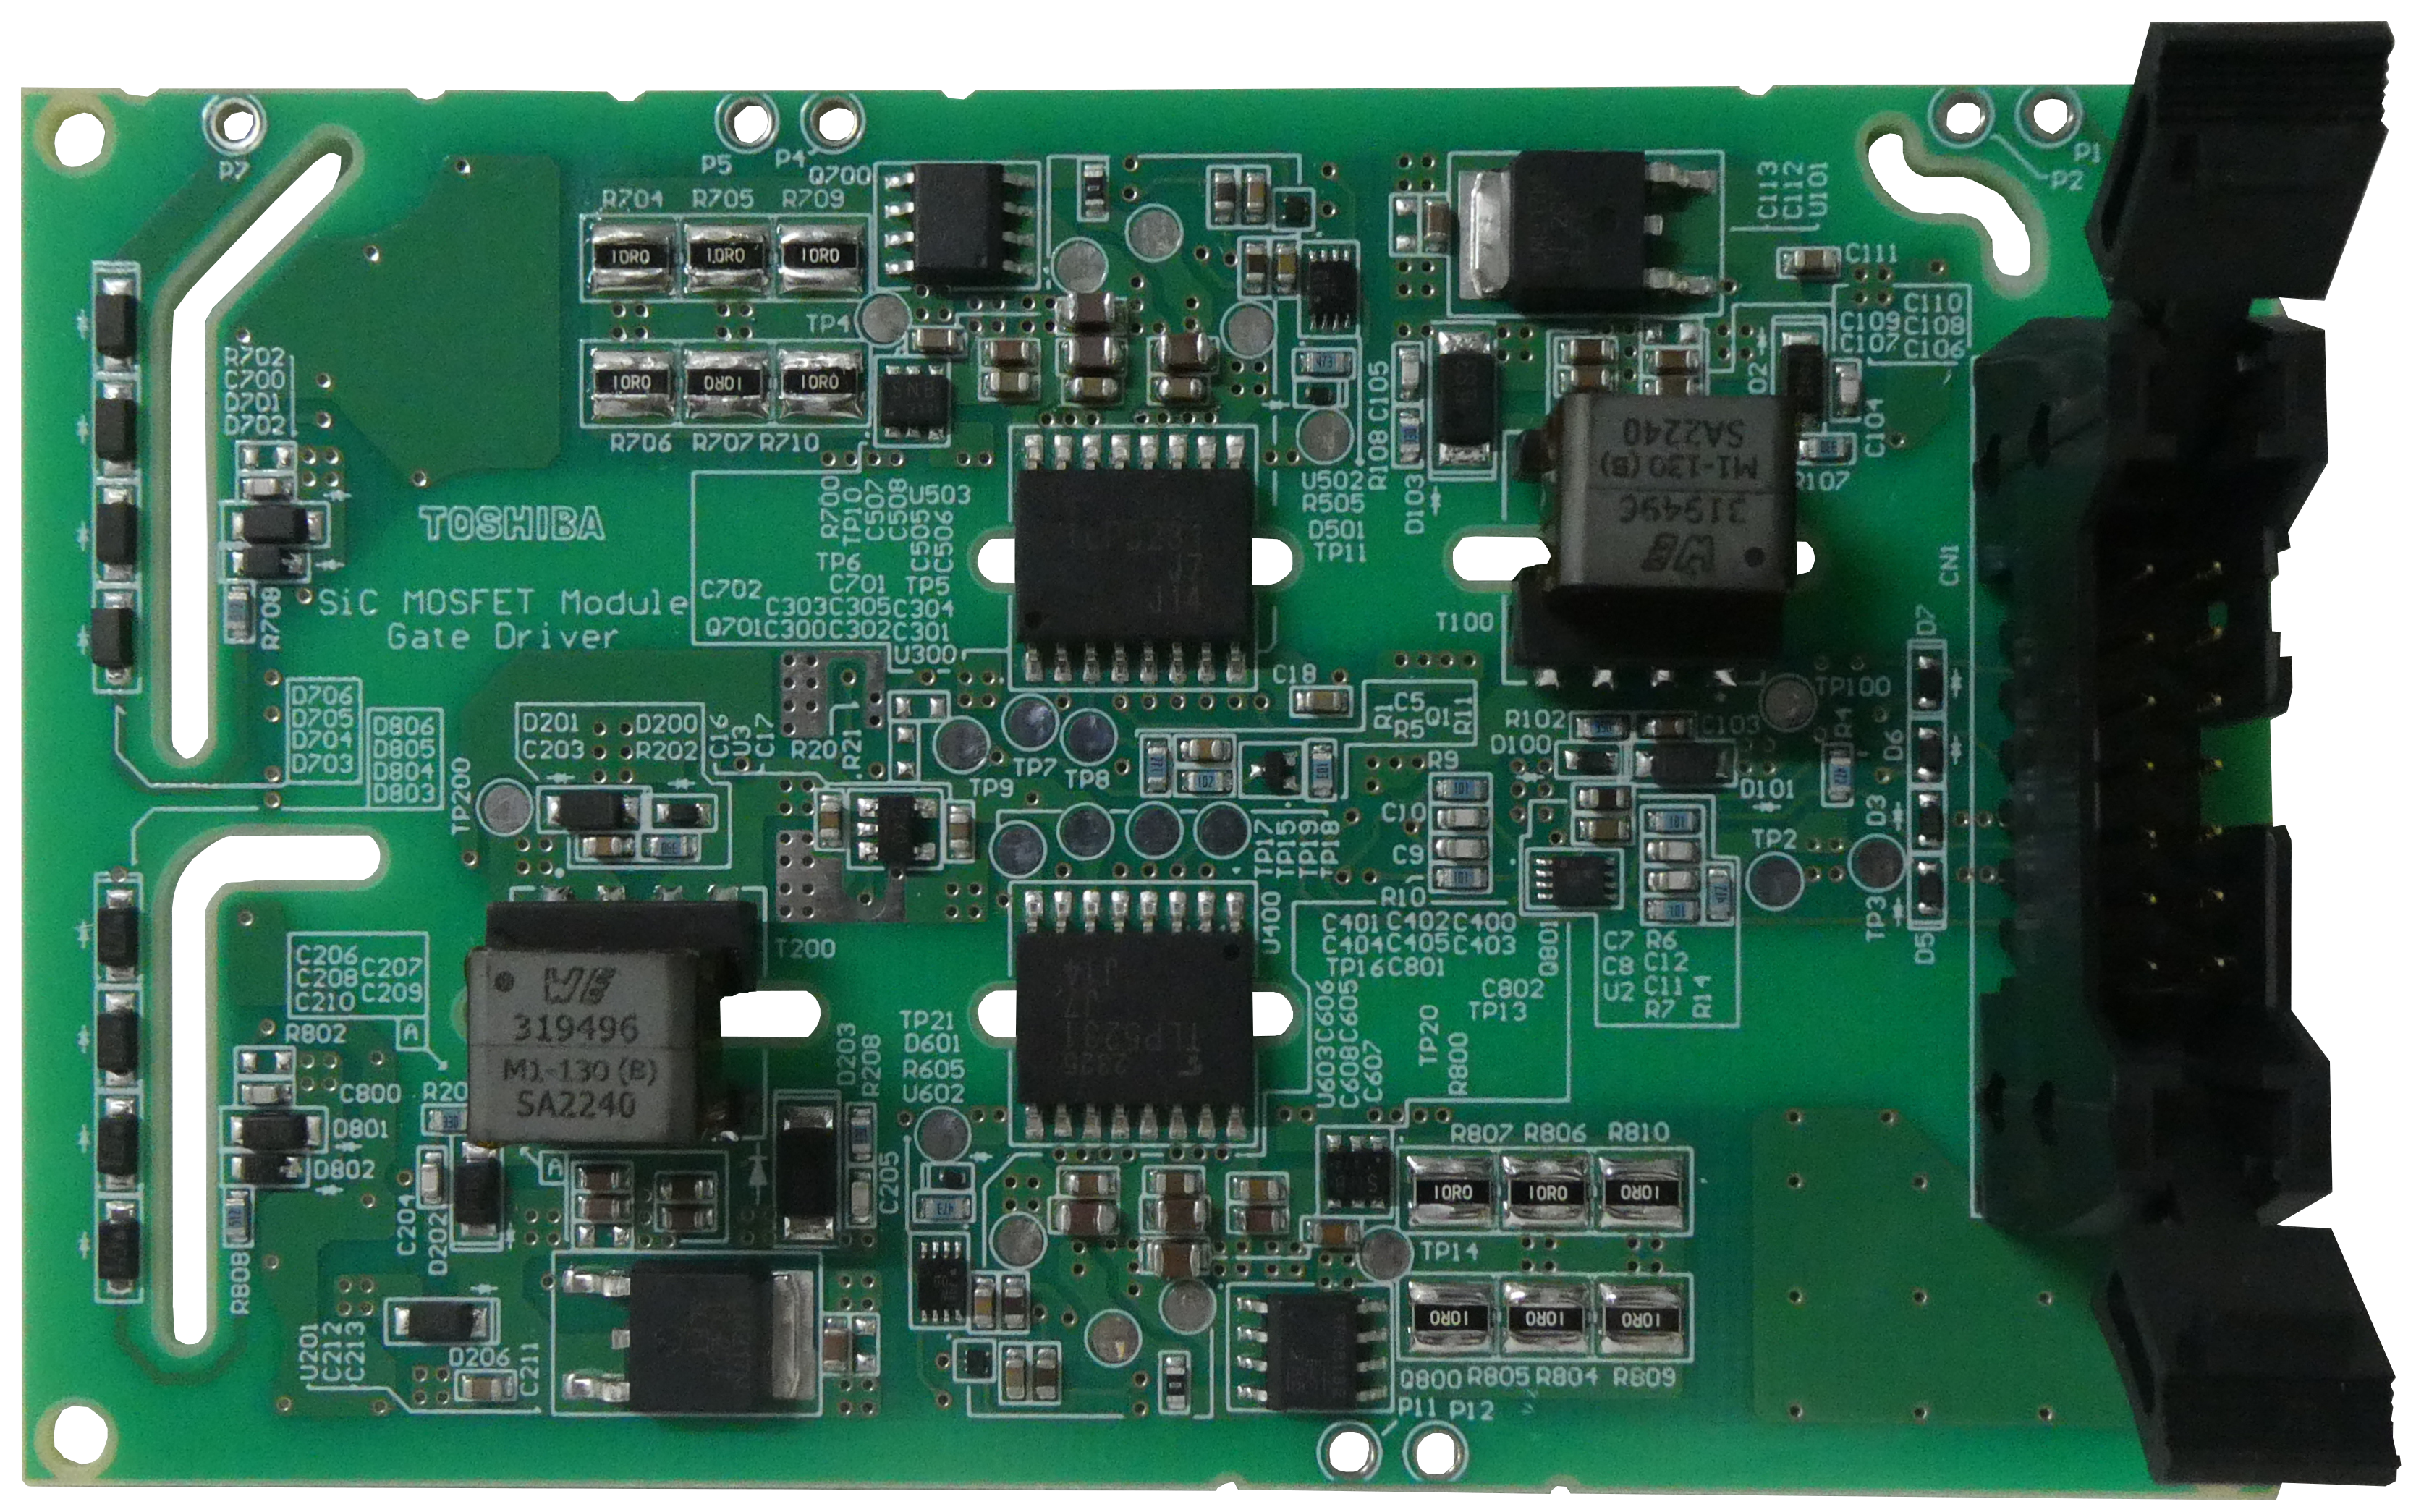 This is a picture of Gate Drive for SiC MOSFET Module.